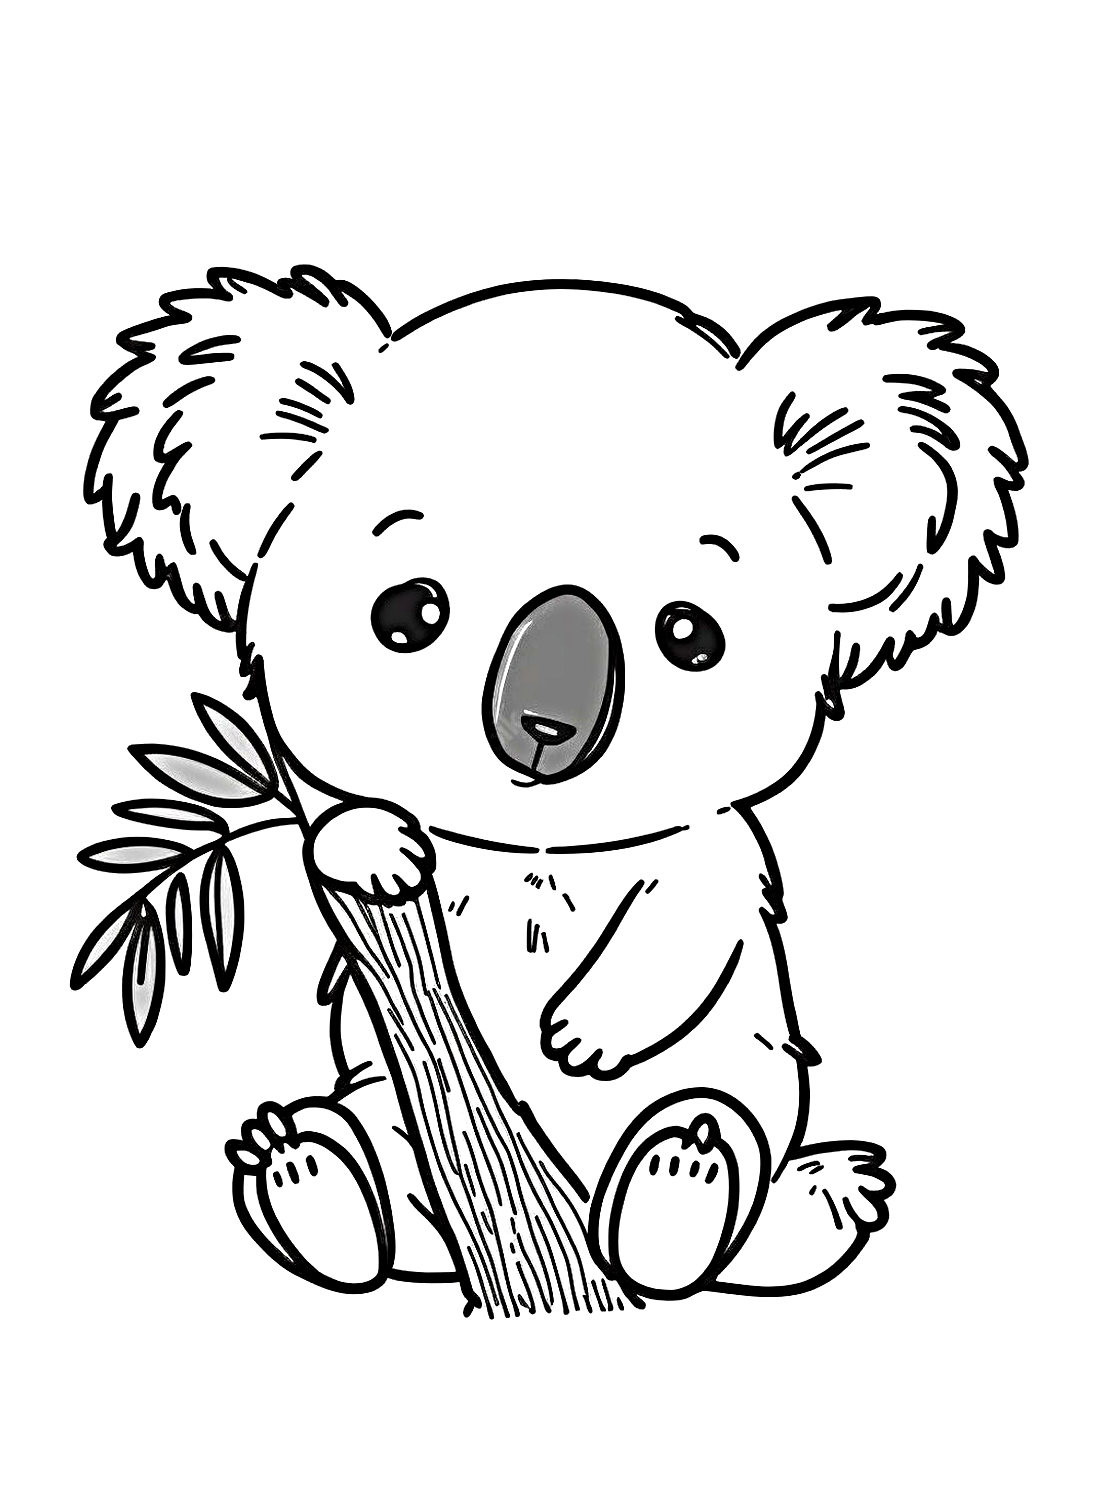 Coloring pages Koala is boring